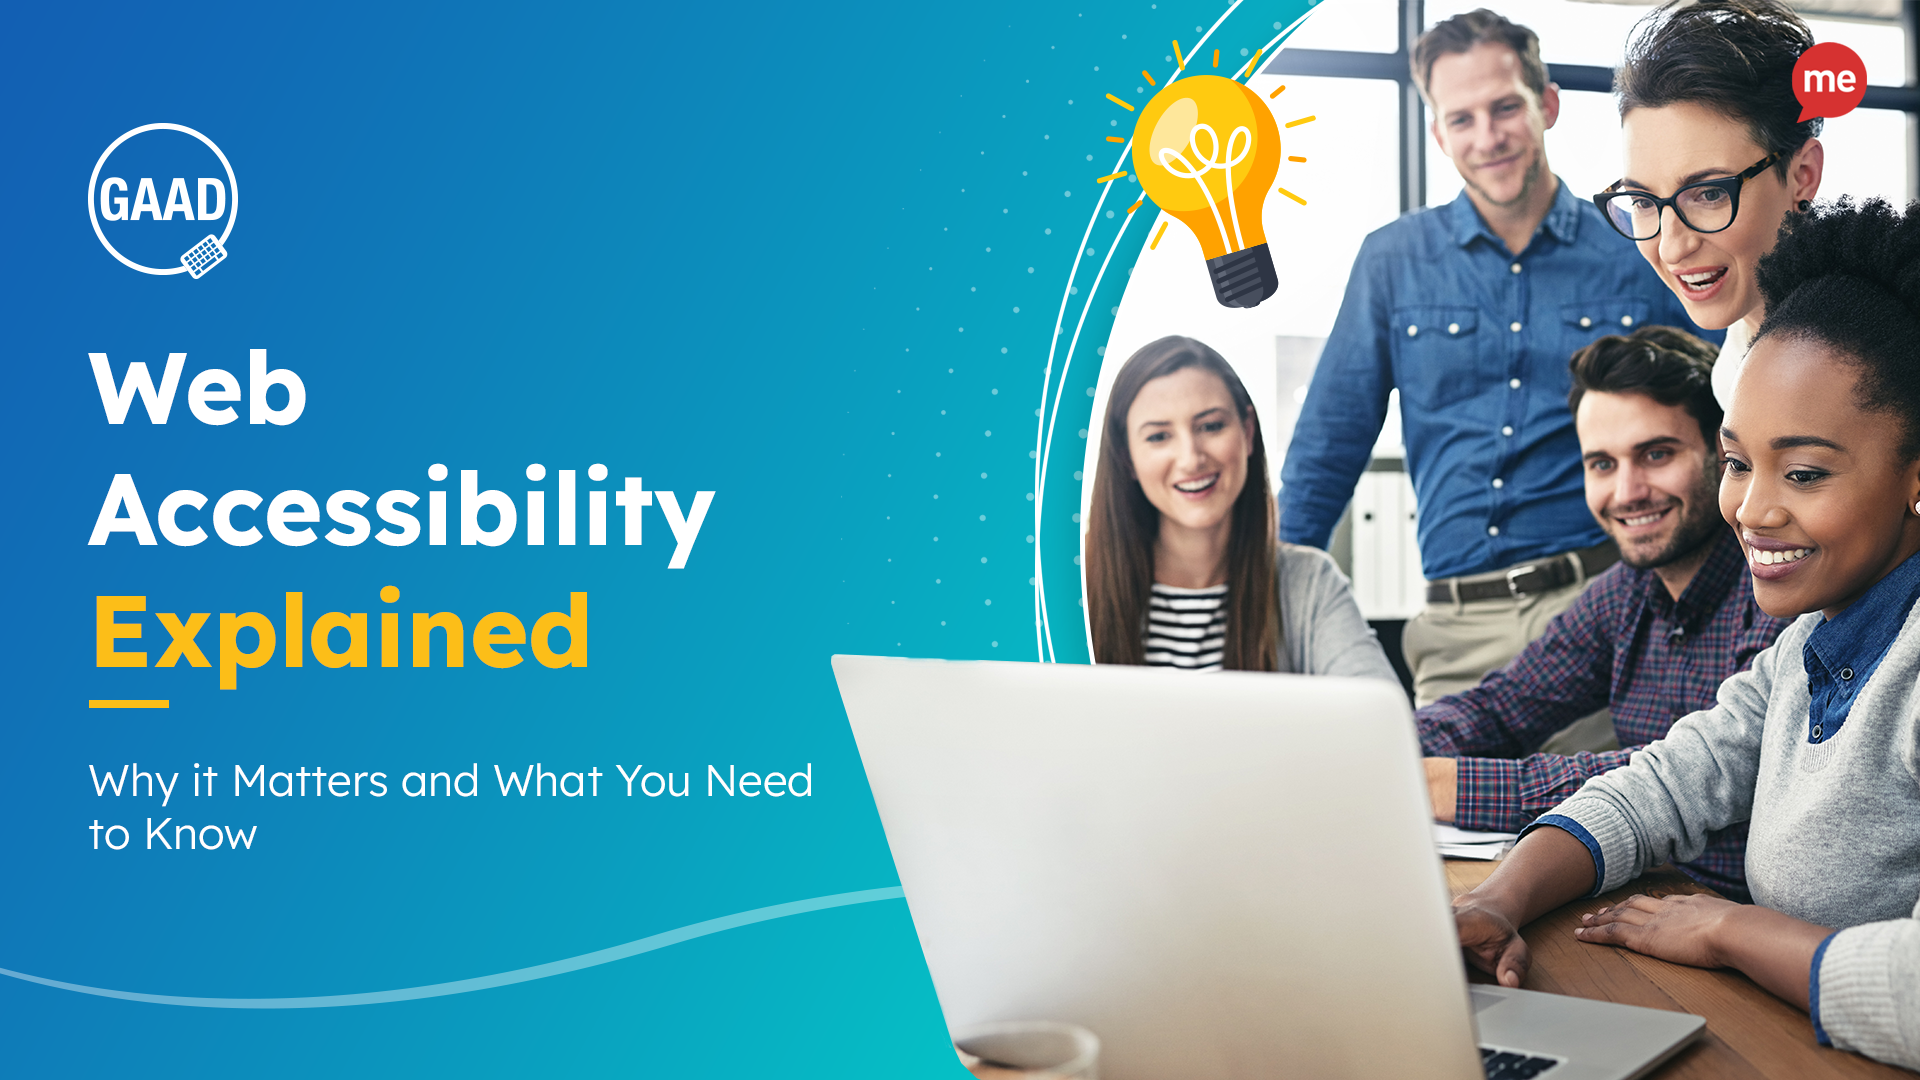 Web Accessibility Explained. Why it matters and what you need to know with images 5 people looking at a laptop.